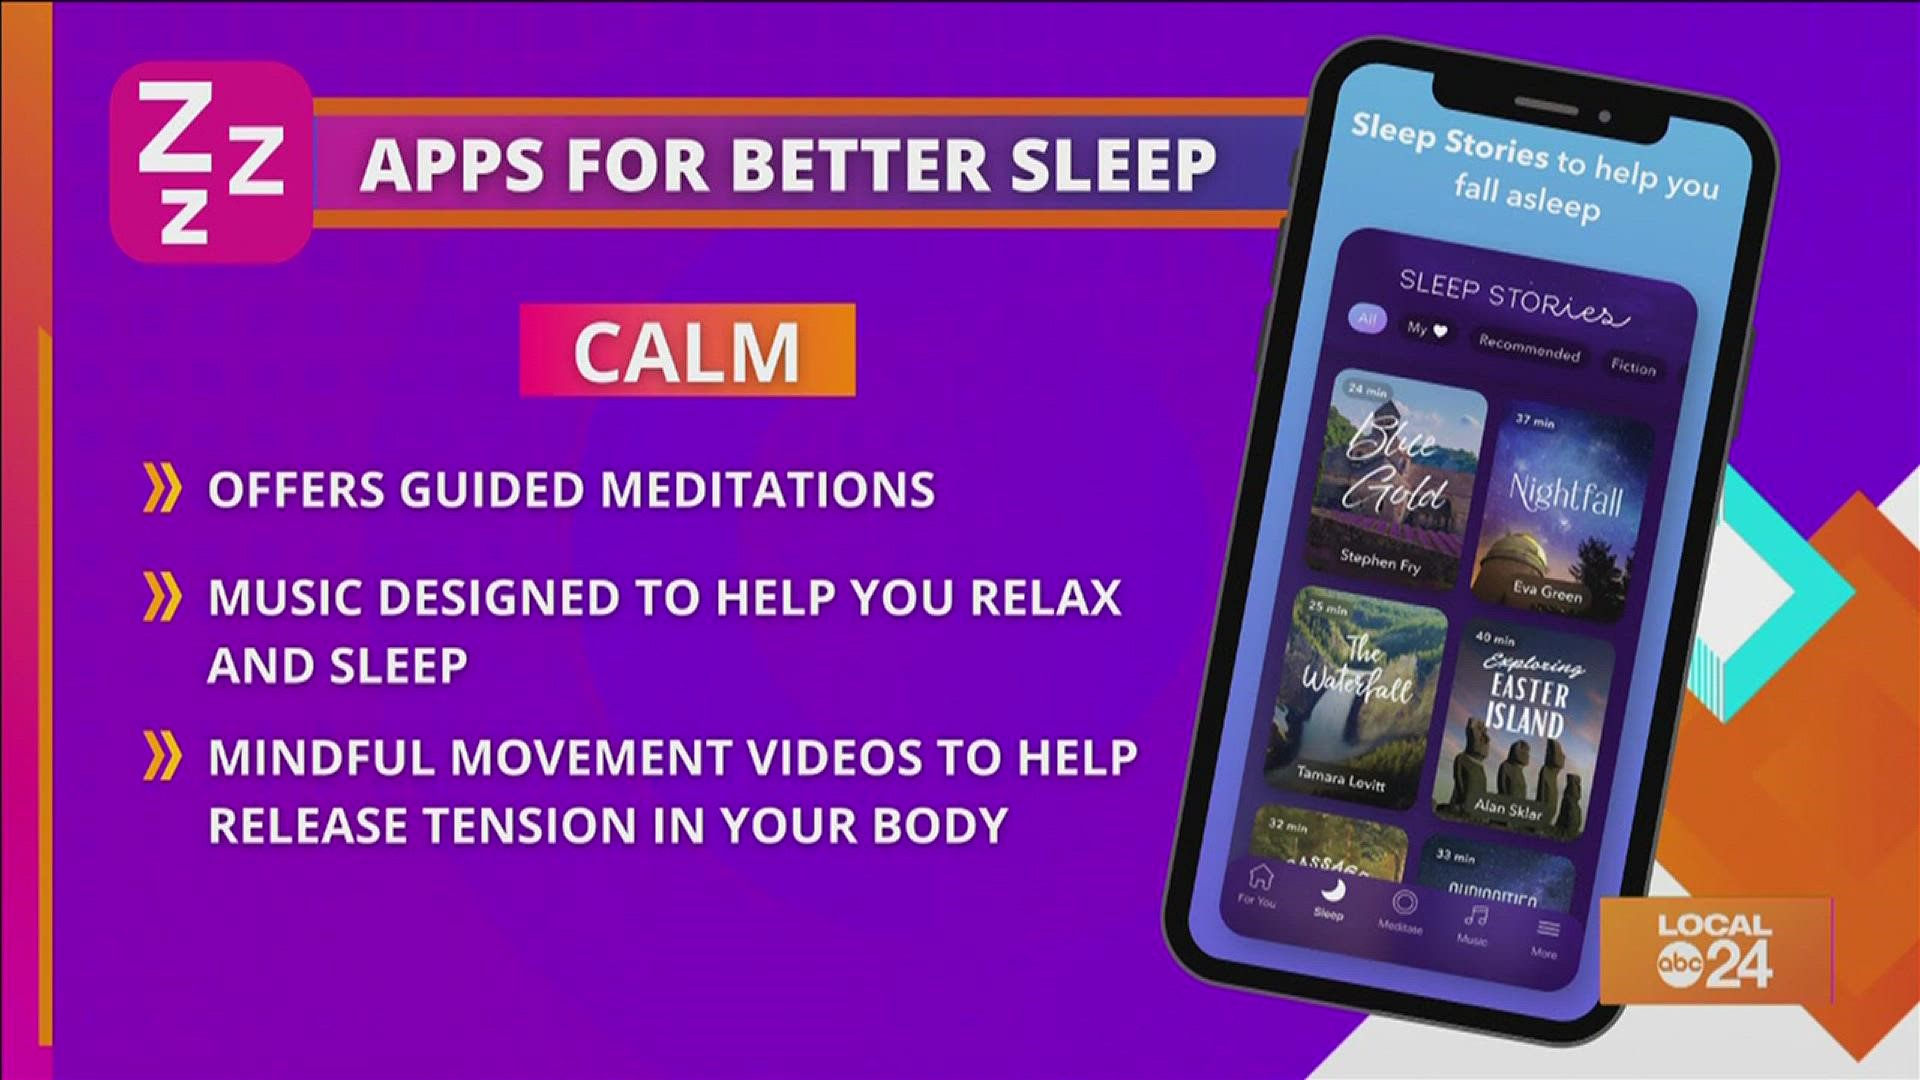 From Calm to Pillow, check out these four apps guaranteed to help you get a good night's sleep! Featuring Sydney Neely right here on "The Shortcut"!